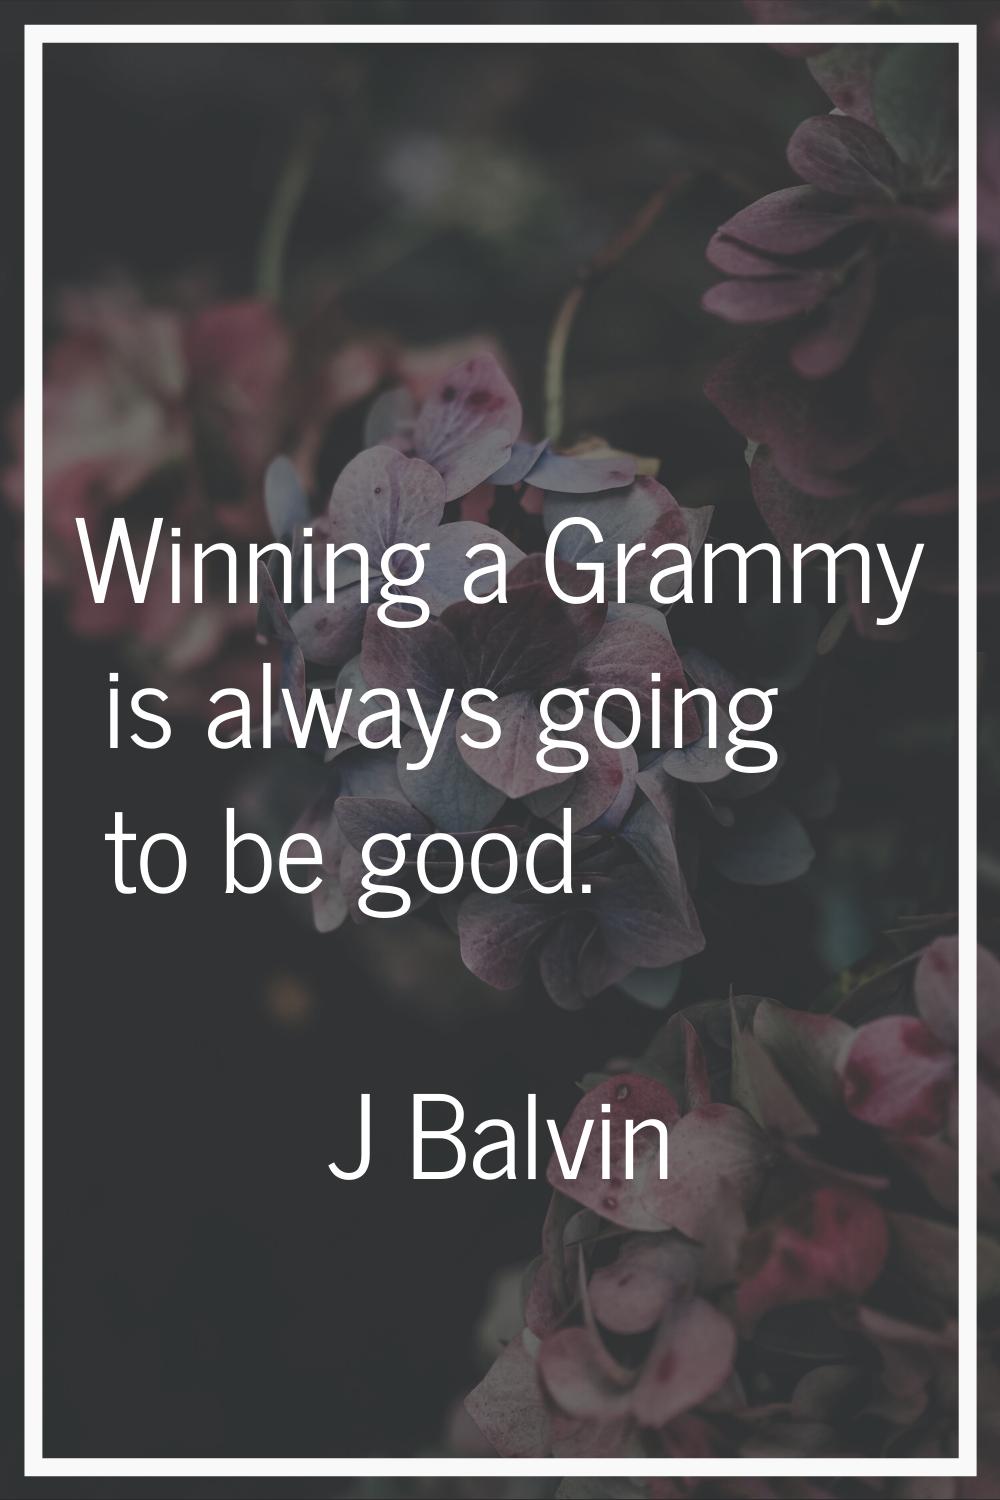 Winning a Grammy is always going to be good.